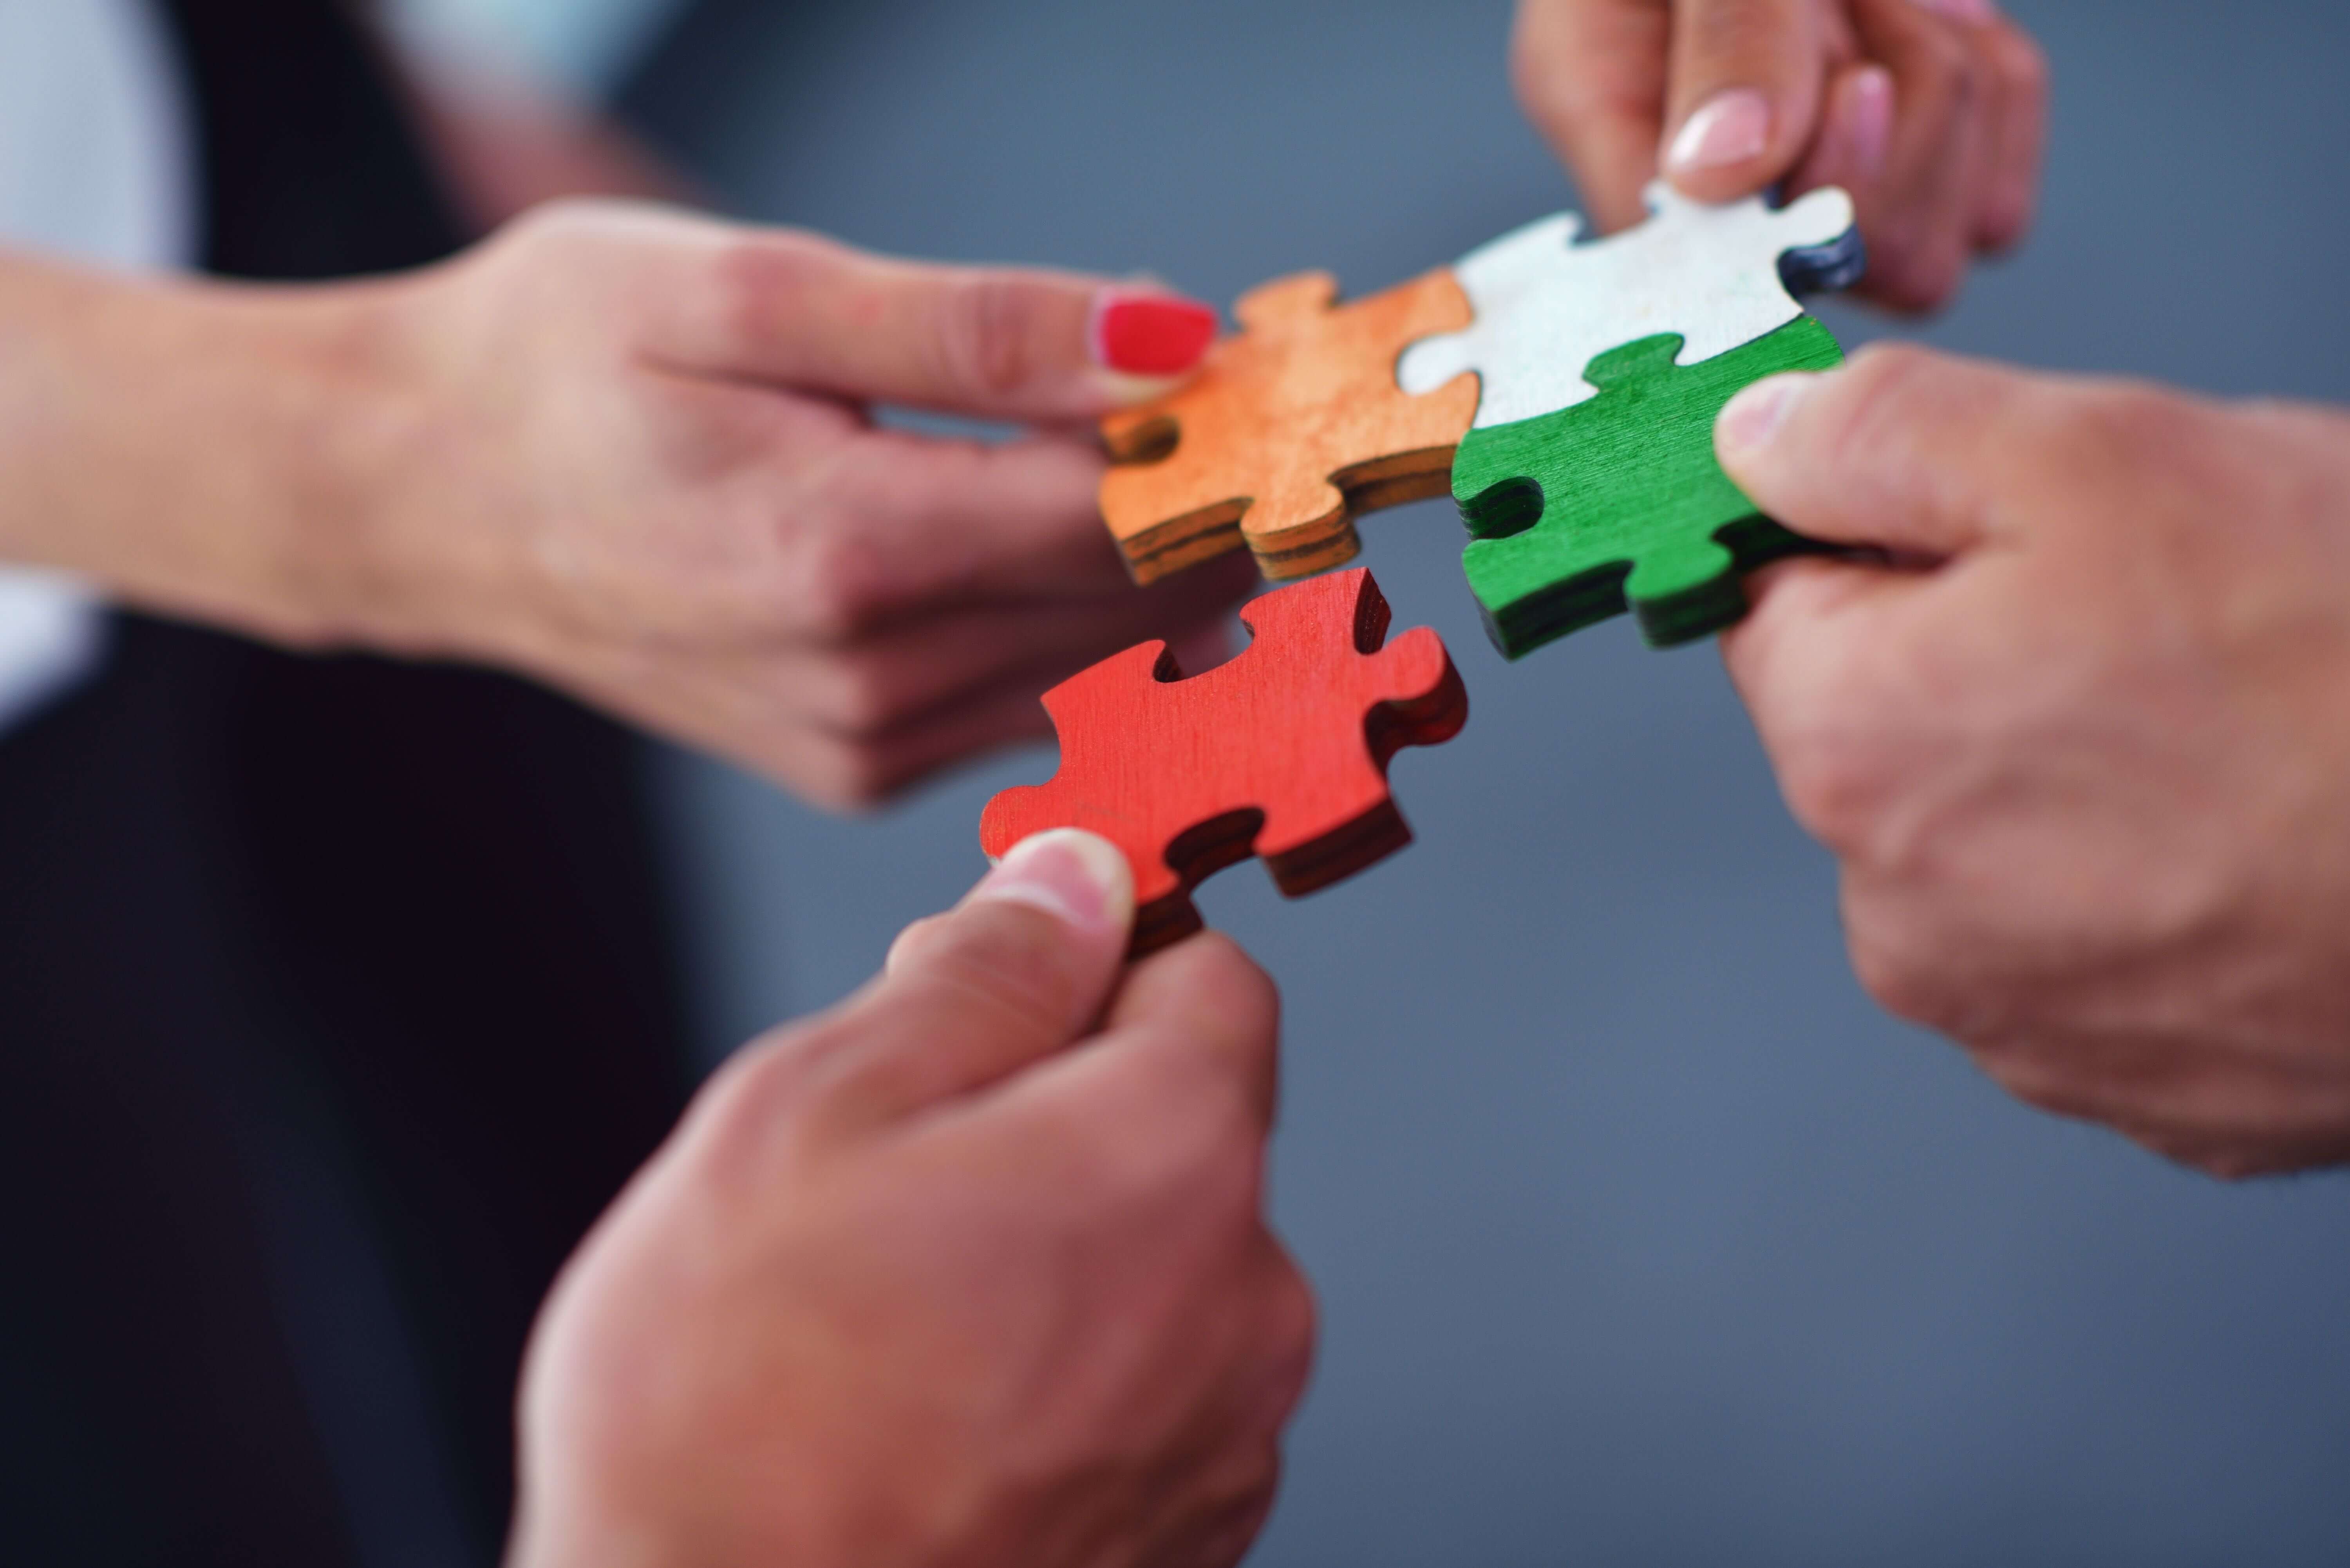 A group of people collaborate to fit together the pieces of a puzzle.